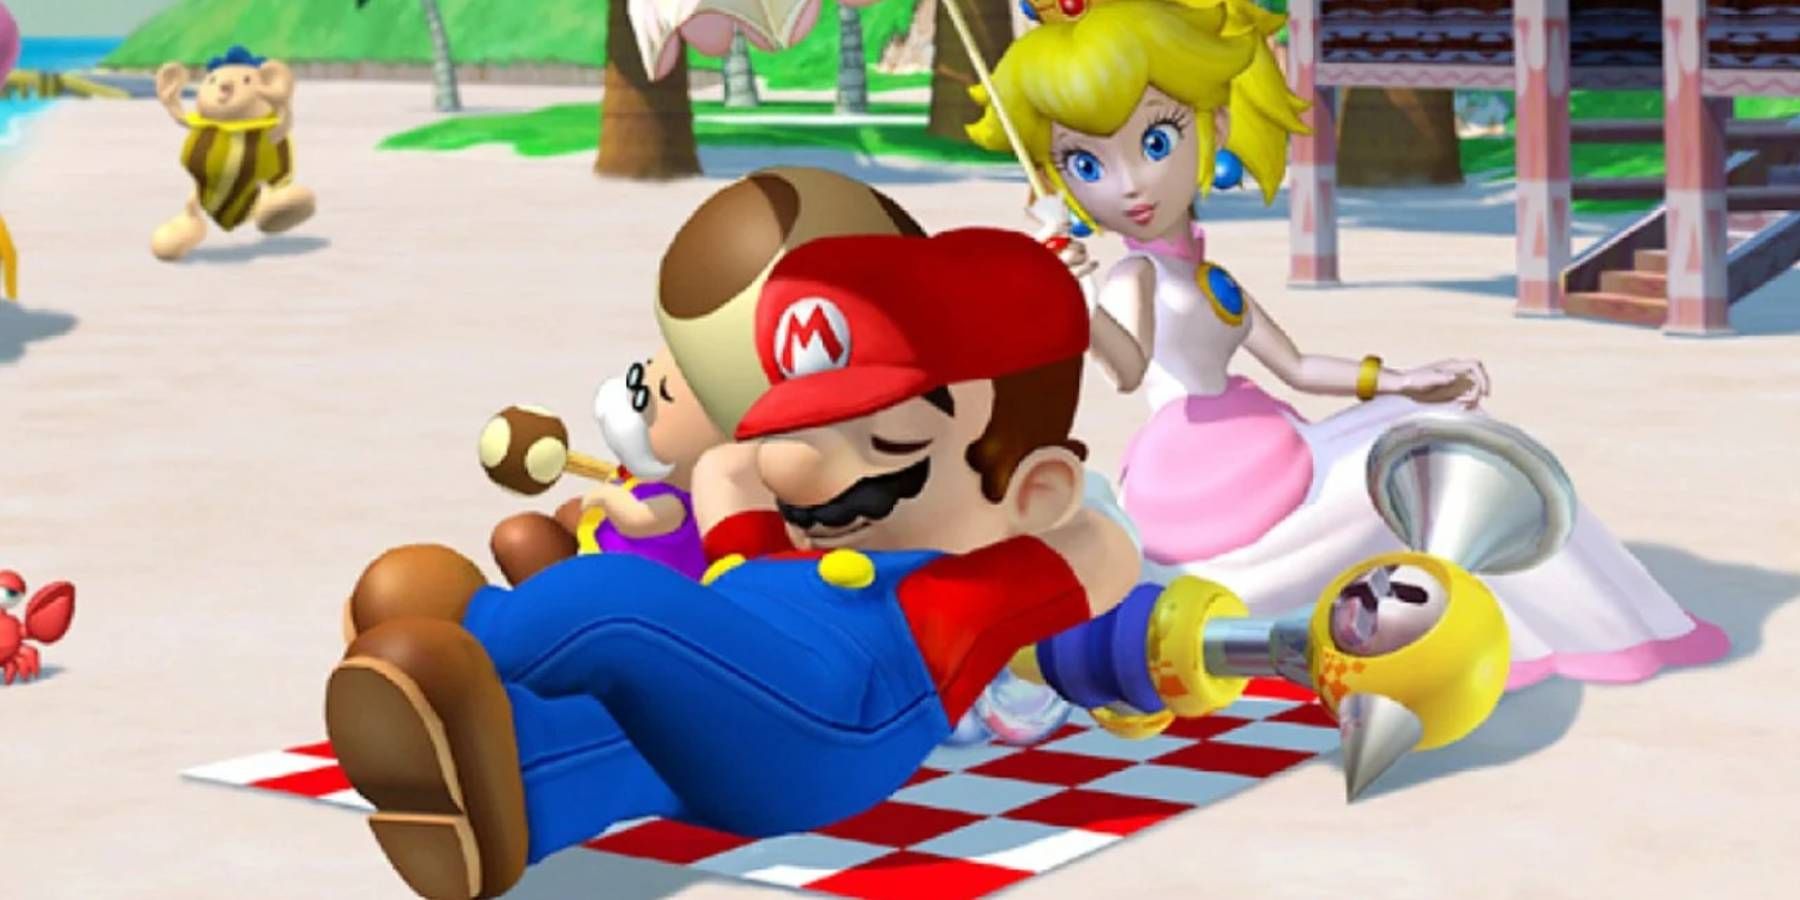 Mario, Princess Peach, and Toadsworth relaxing on the beach in Super Mario Sunshine